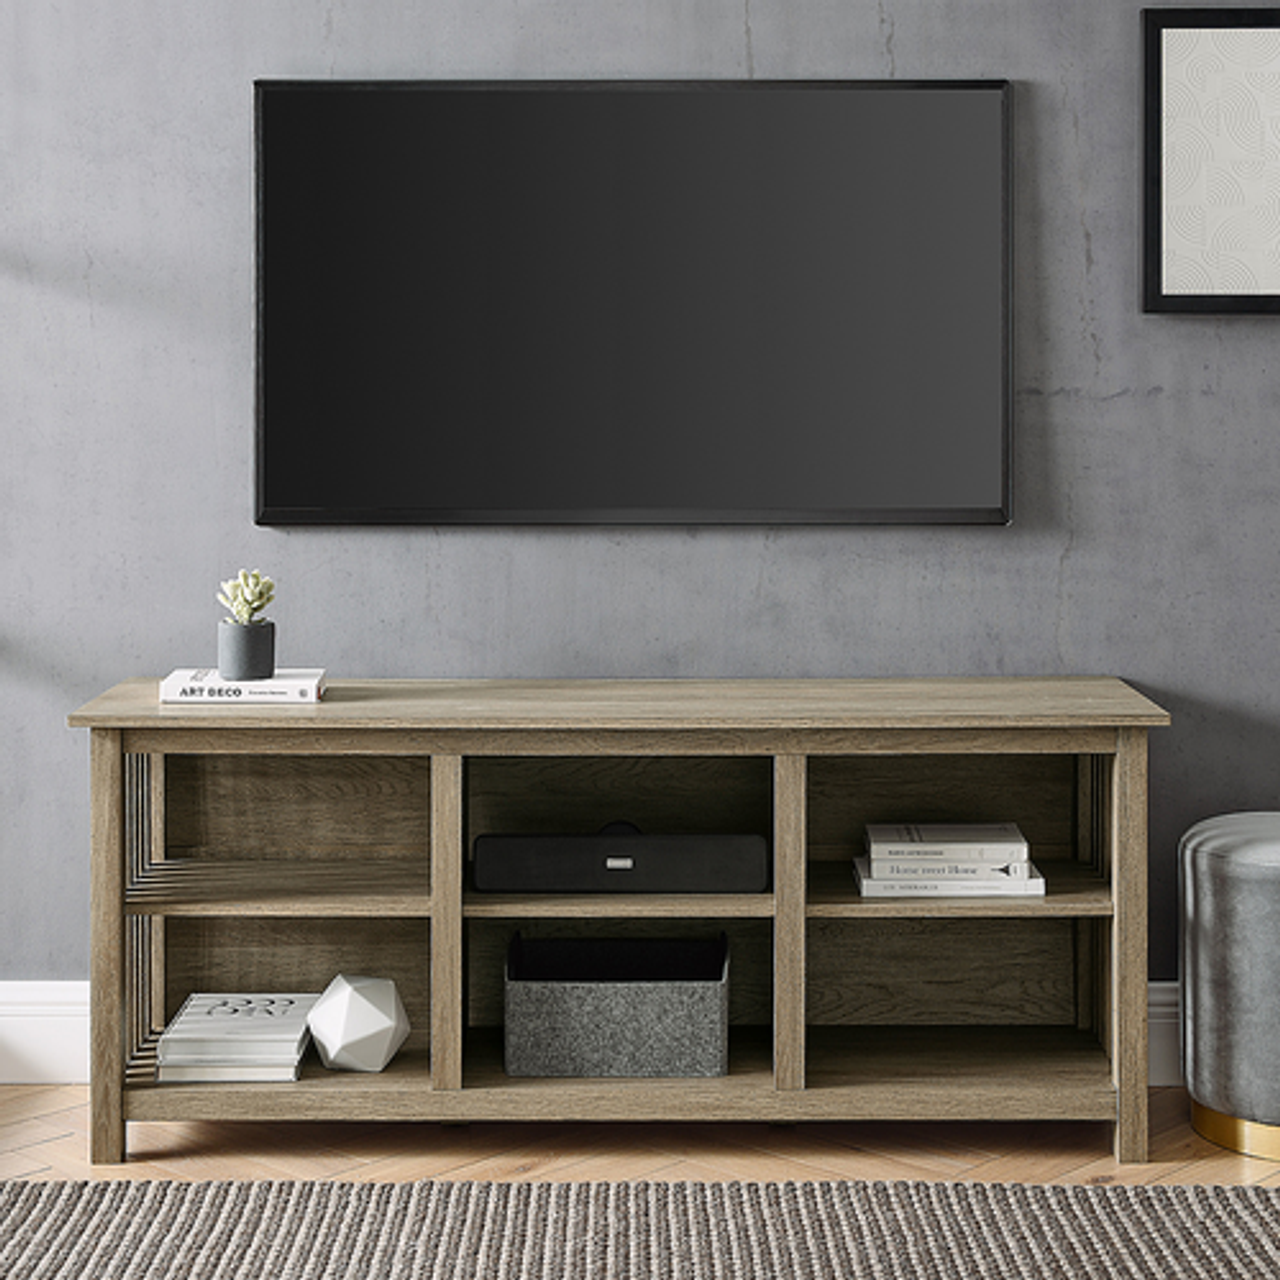 Walker Edison - Mission-Style 6-Cubby TV Stand for TVs up to 65” - Driftwood